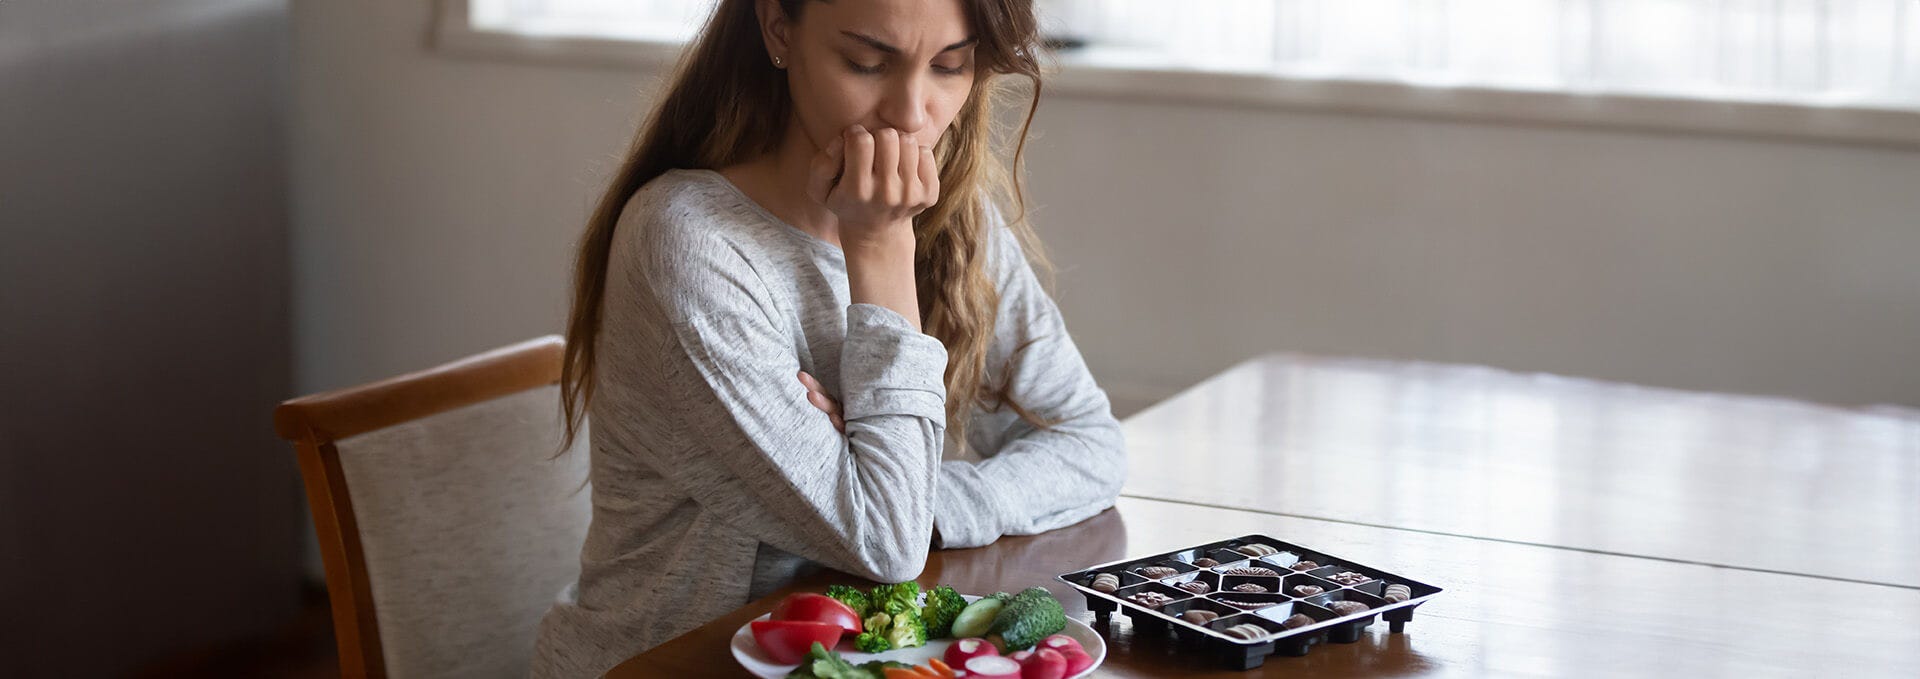 the dark side of diets for quick weight loss